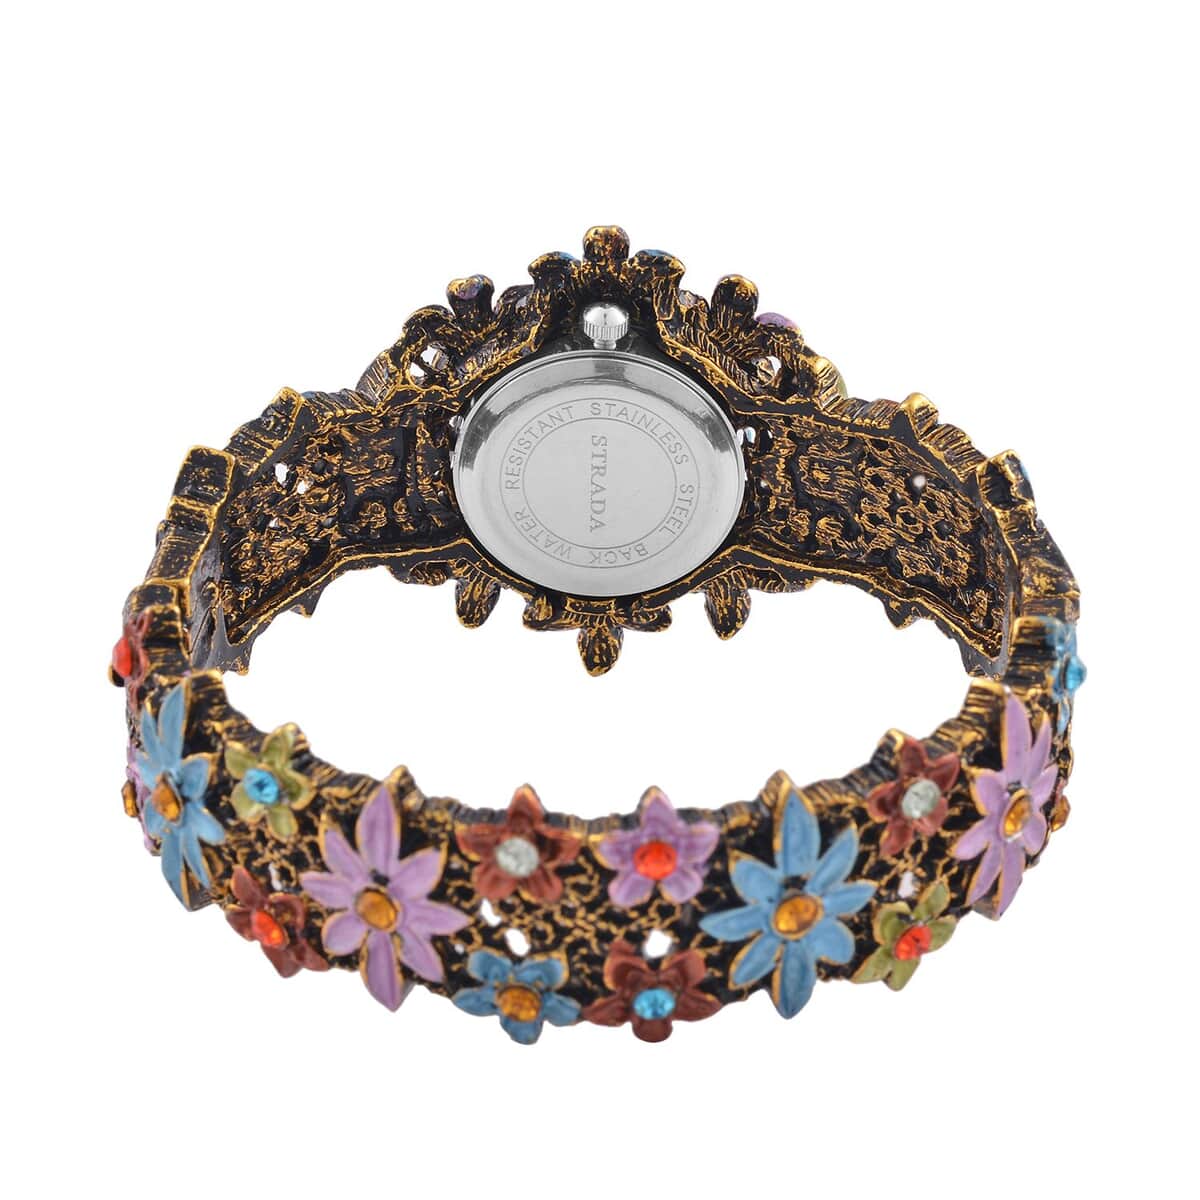 Strada Multi Color Austrian Crystal Japanese Movement Flower Pattern Bangle Watch in Black Oxidized Bronze Plating (39.37 mm) (6.50-6.75 Inches) image number 6